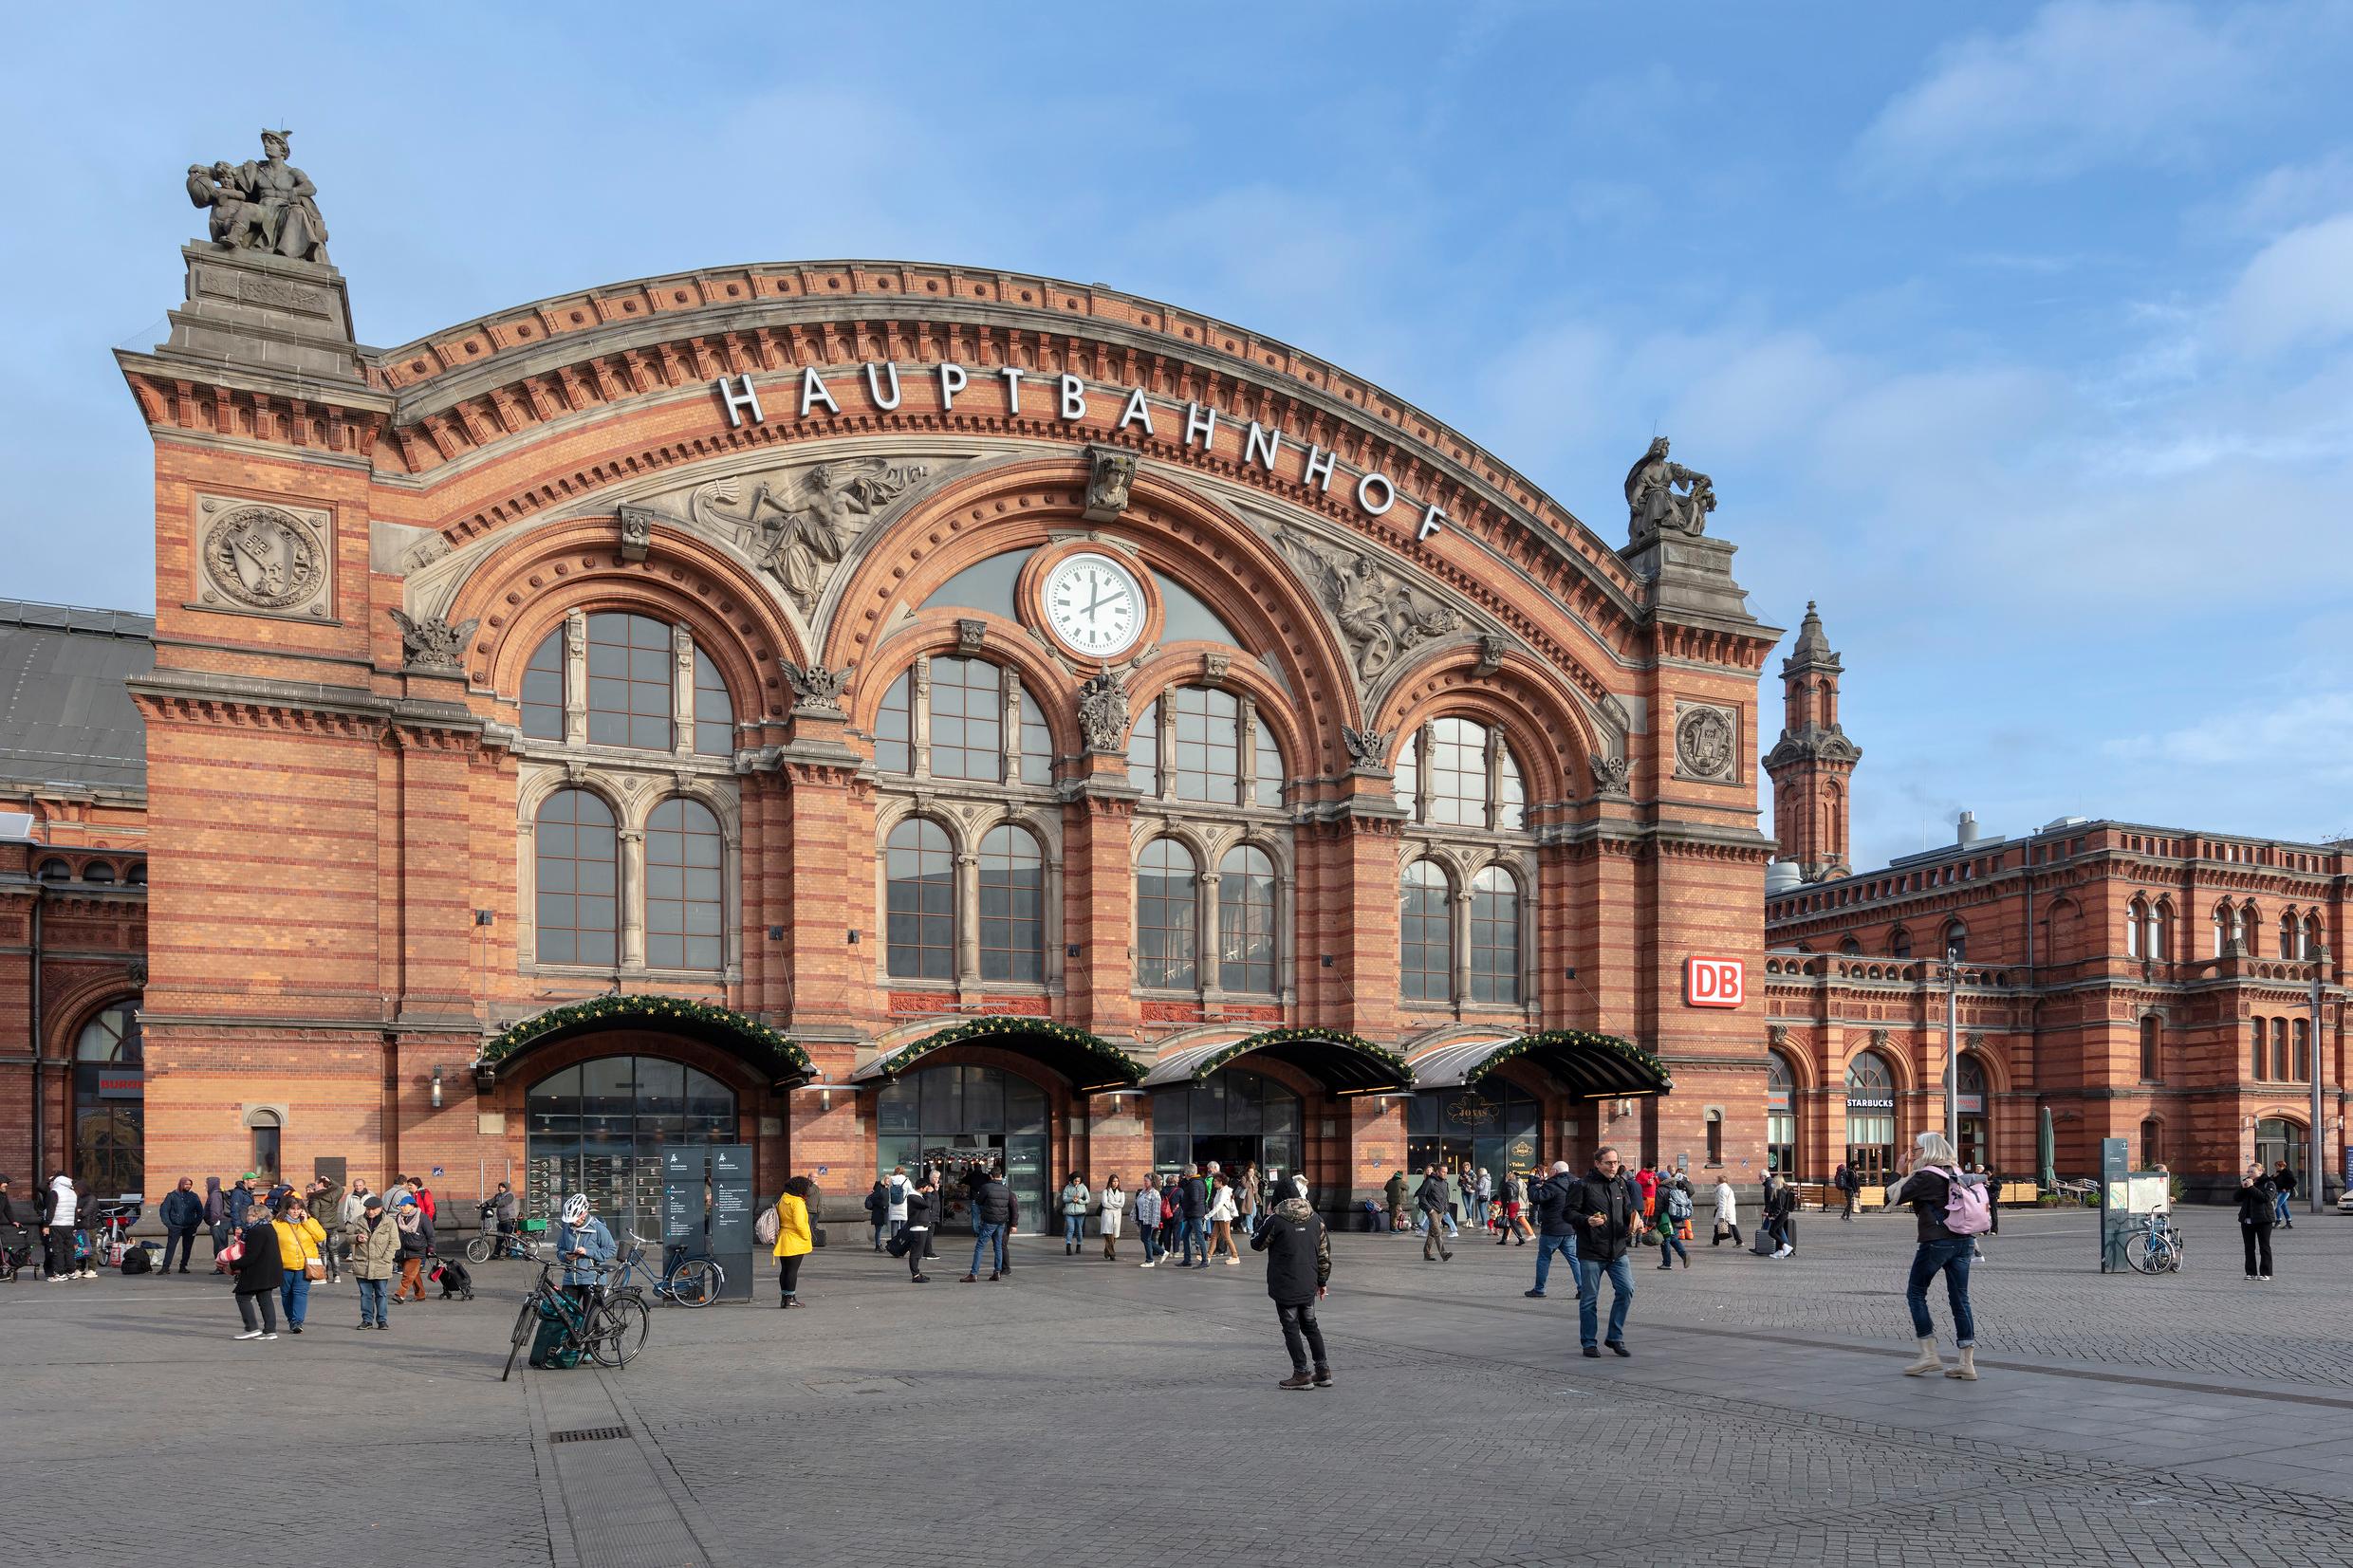 The view of the station building at Bremen Hauptbahnhof.